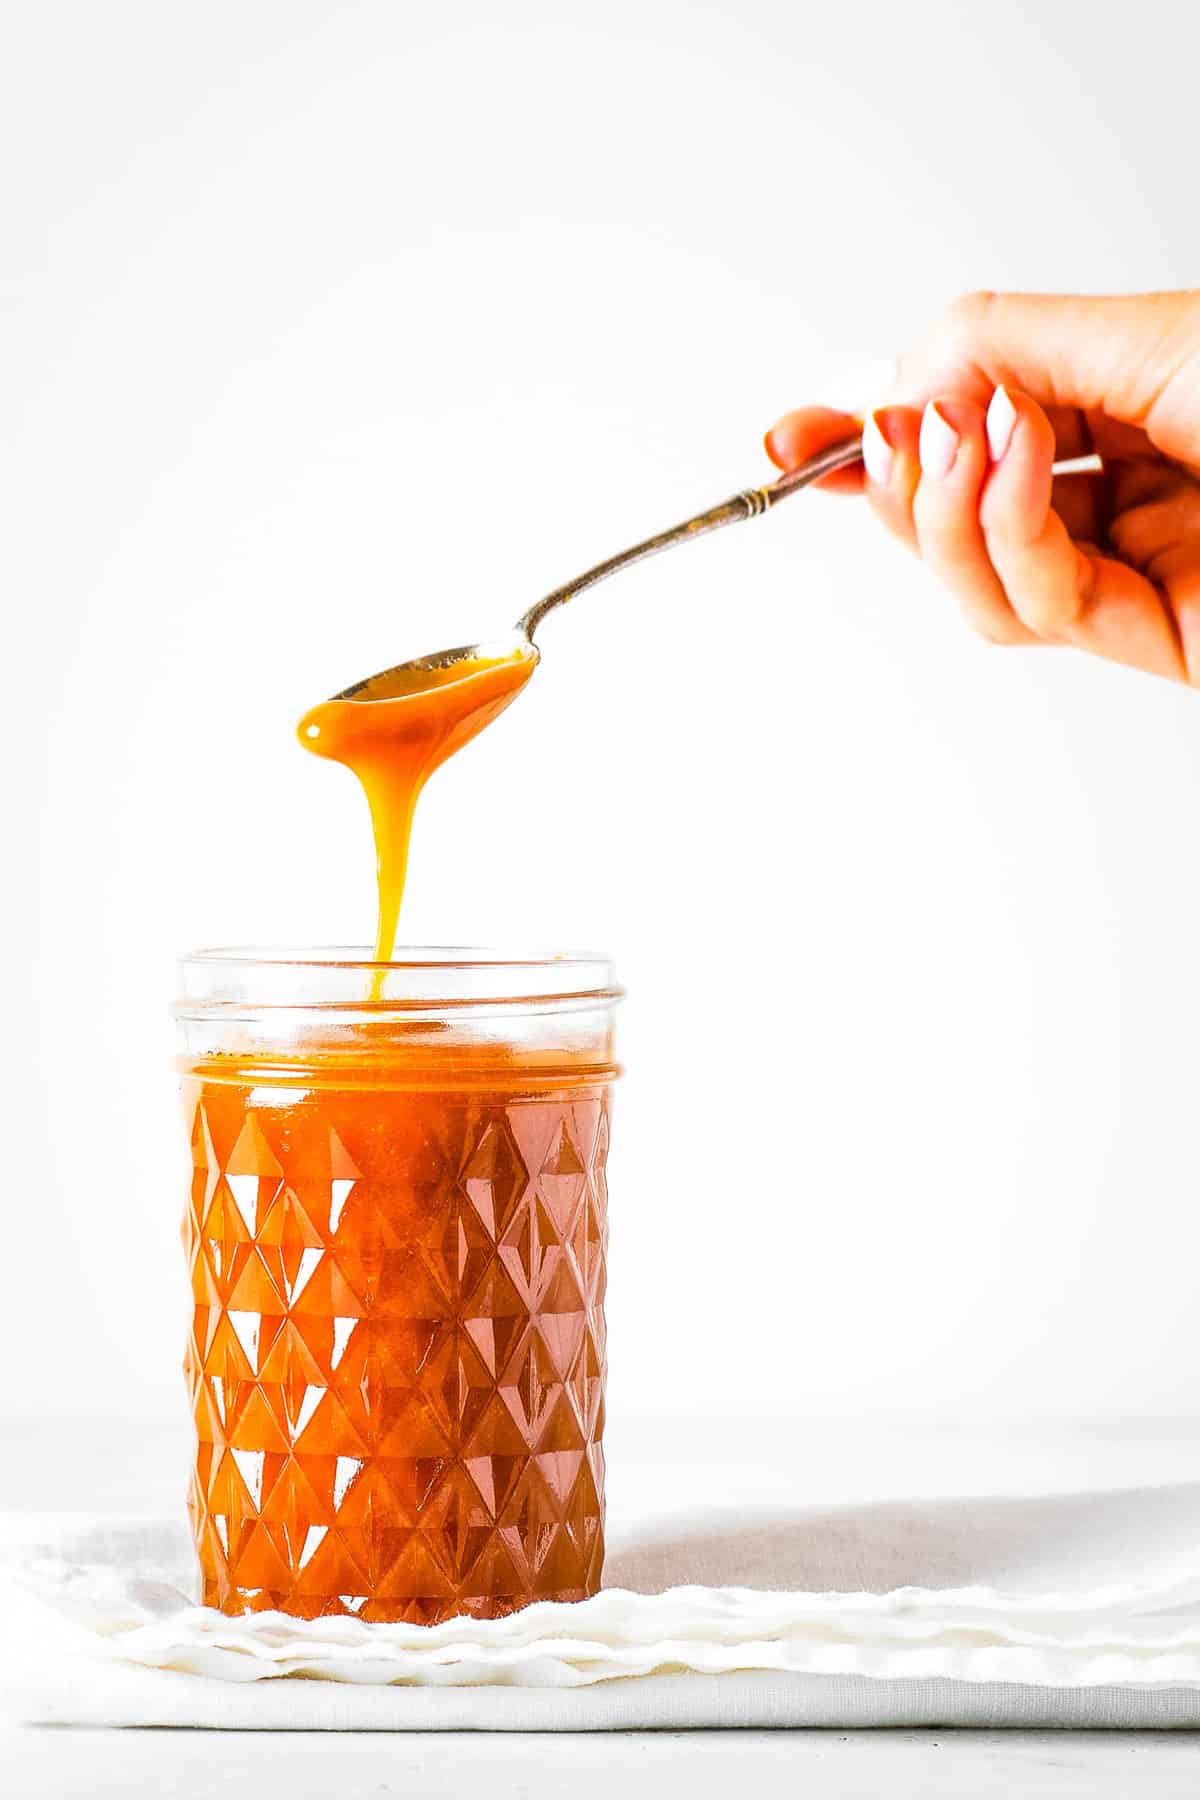 A jar of miso caramel with a hand lifting a spoonful of the caramel out of the jar.